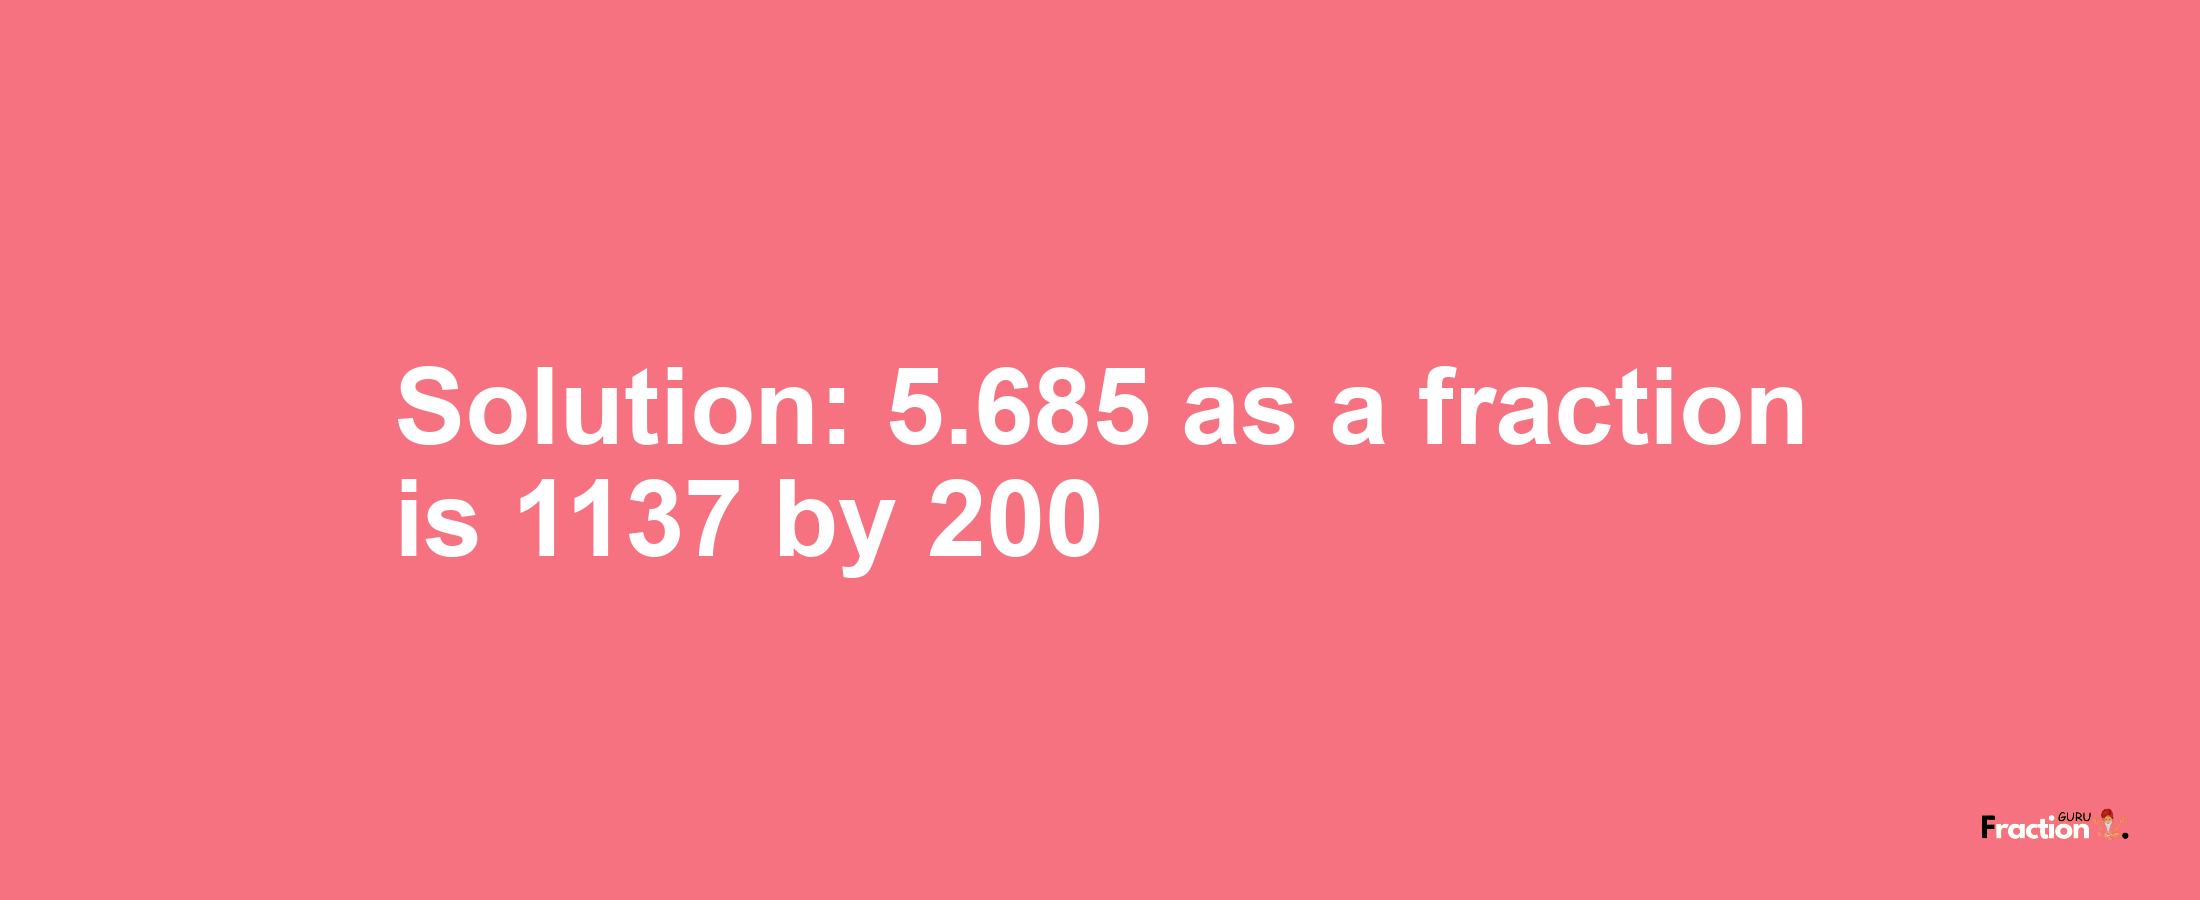 Solution:5.685 as a fraction is 1137/200